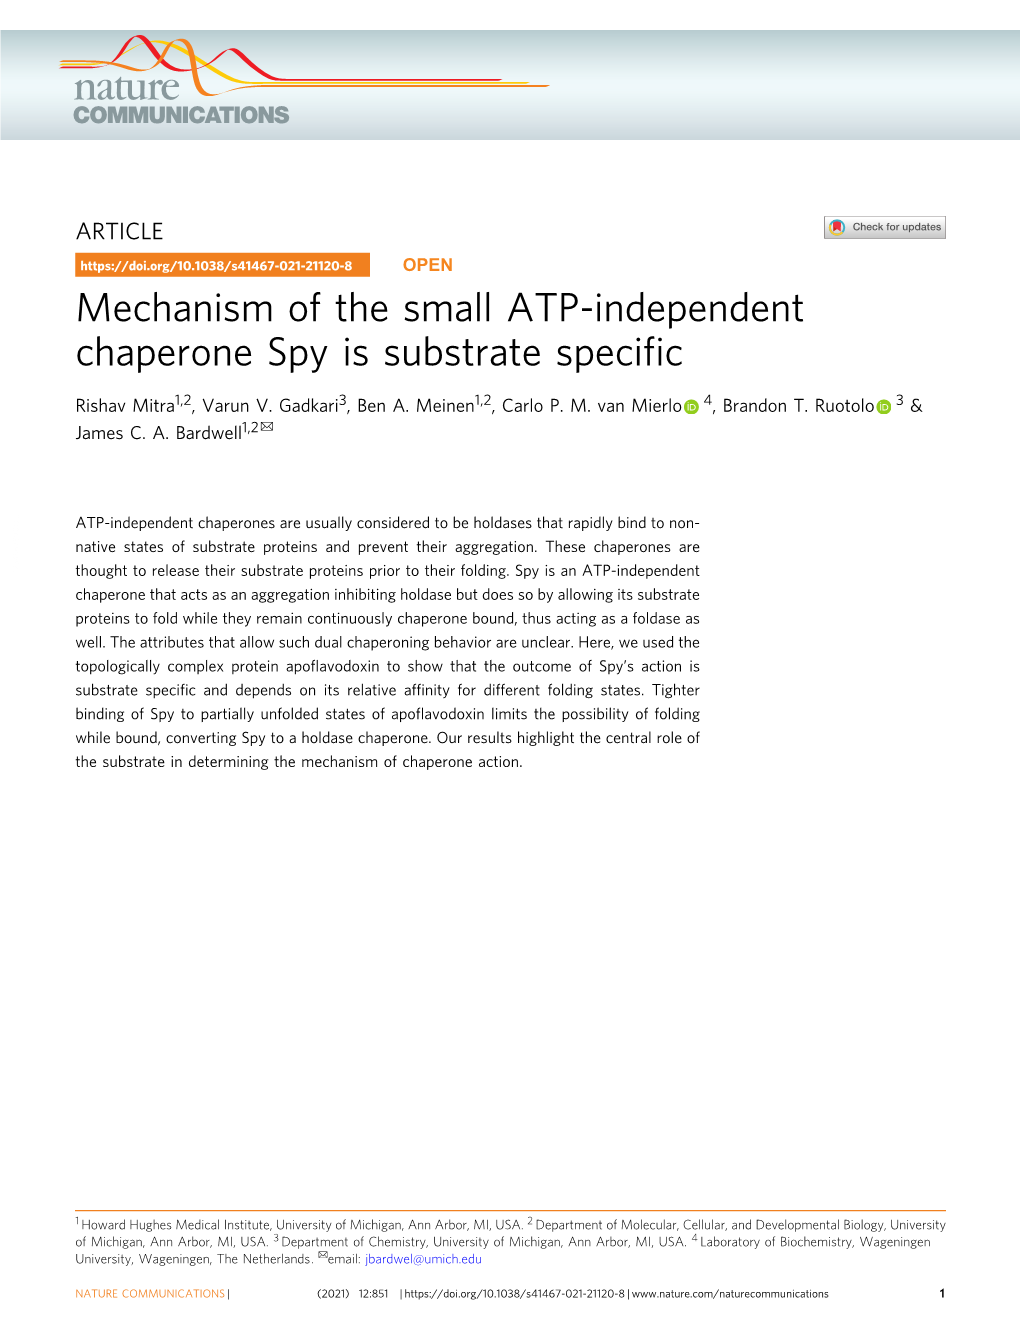 Mechanism of the Small ATP-Independent Chaperone Spy Is Substrate Speciﬁc